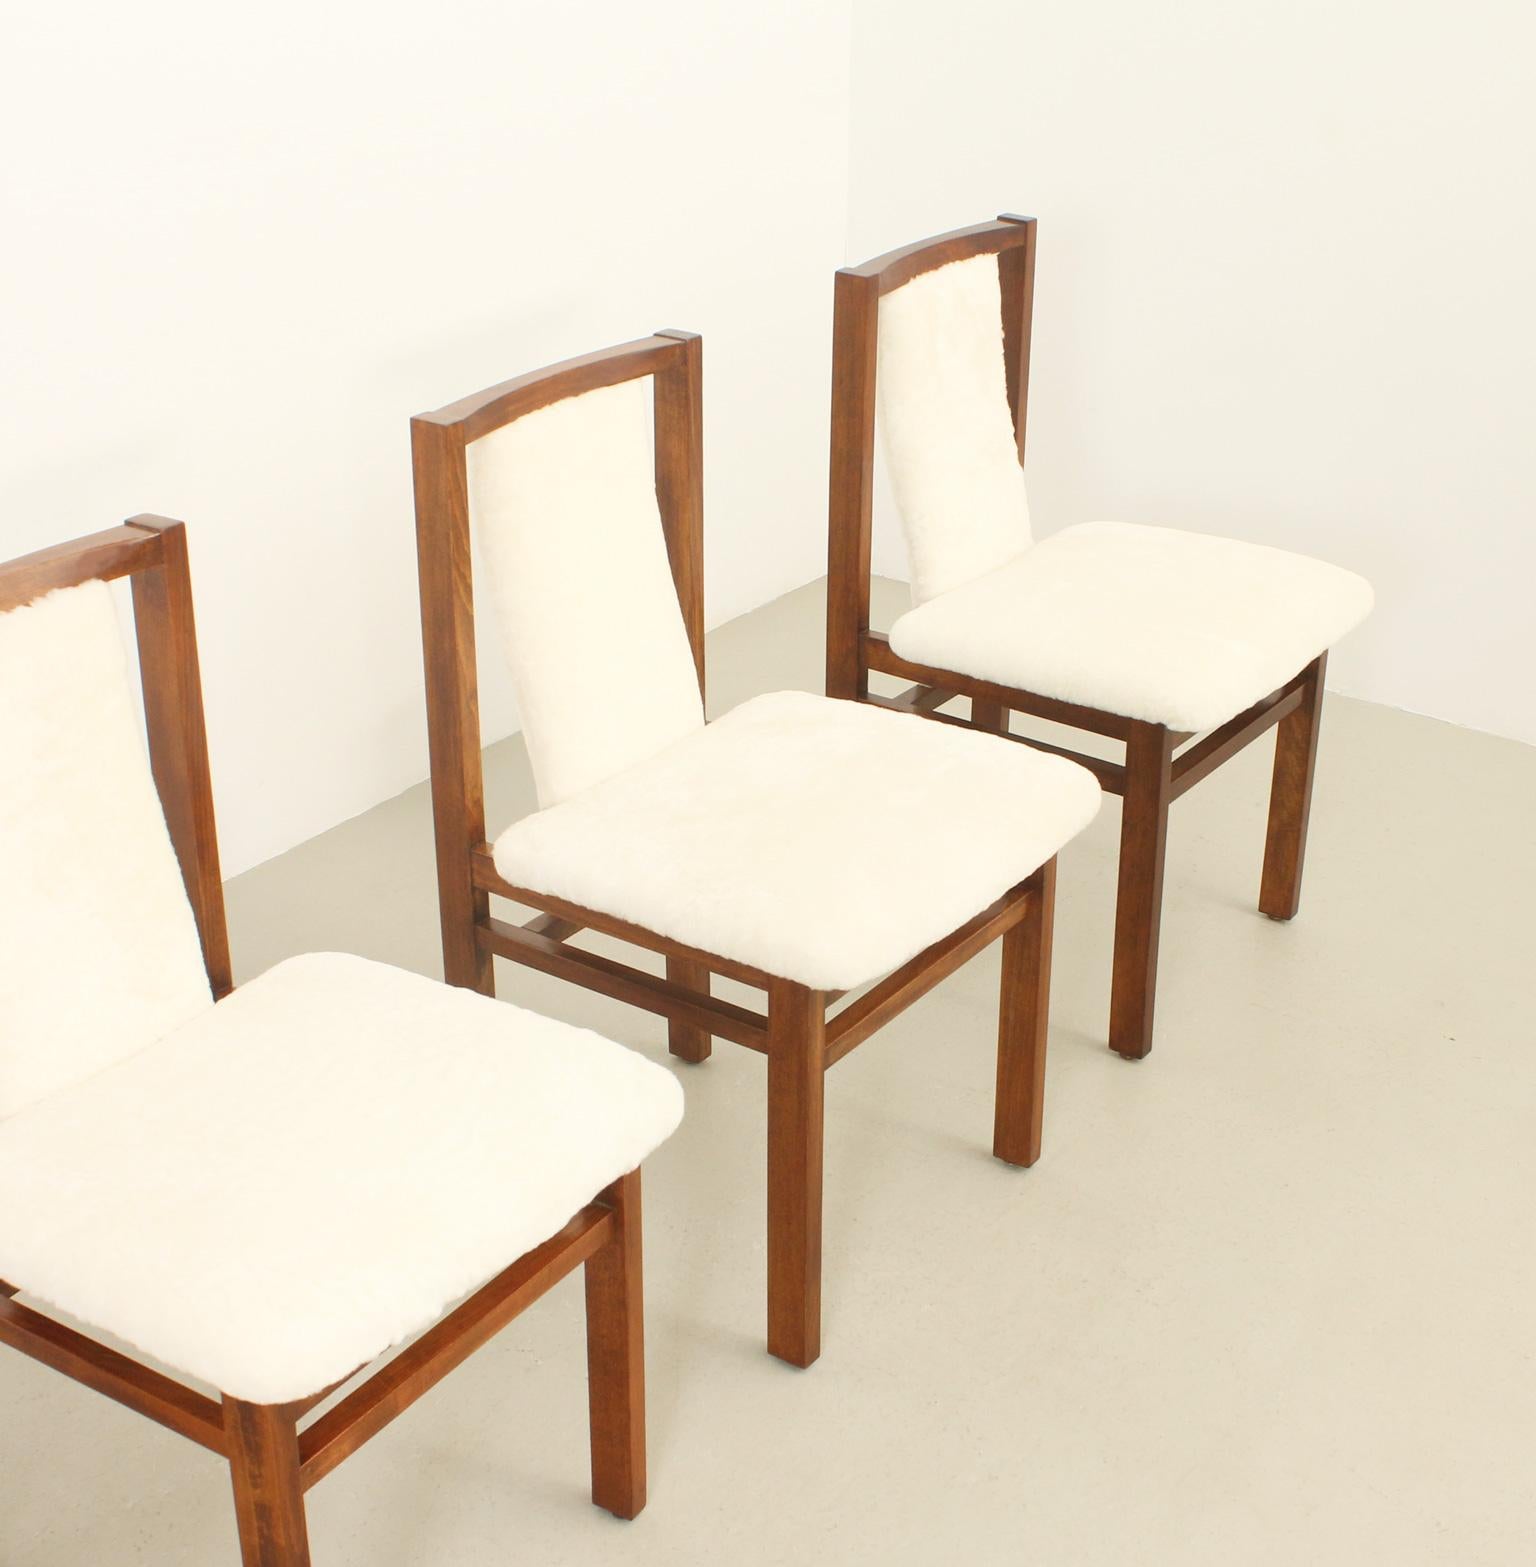 Four Dining Chairs by Jordi Vilanova in Oak Wood and Sheepskin, Spain, 1960's In Good Condition For Sale In Barcelona, ES